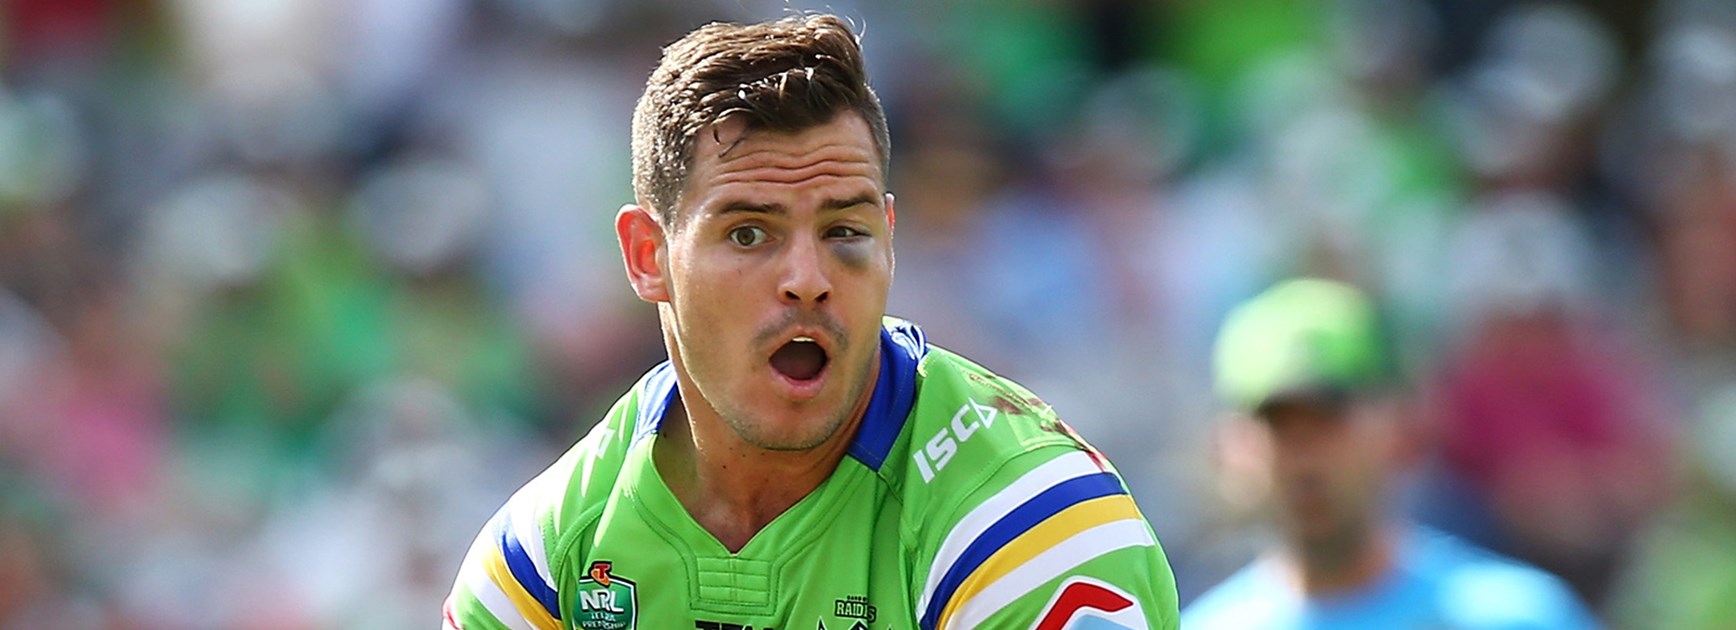 Raiders halfback Aidan Sezer fractured his eye socket in the win over the Panthers in Round 1.